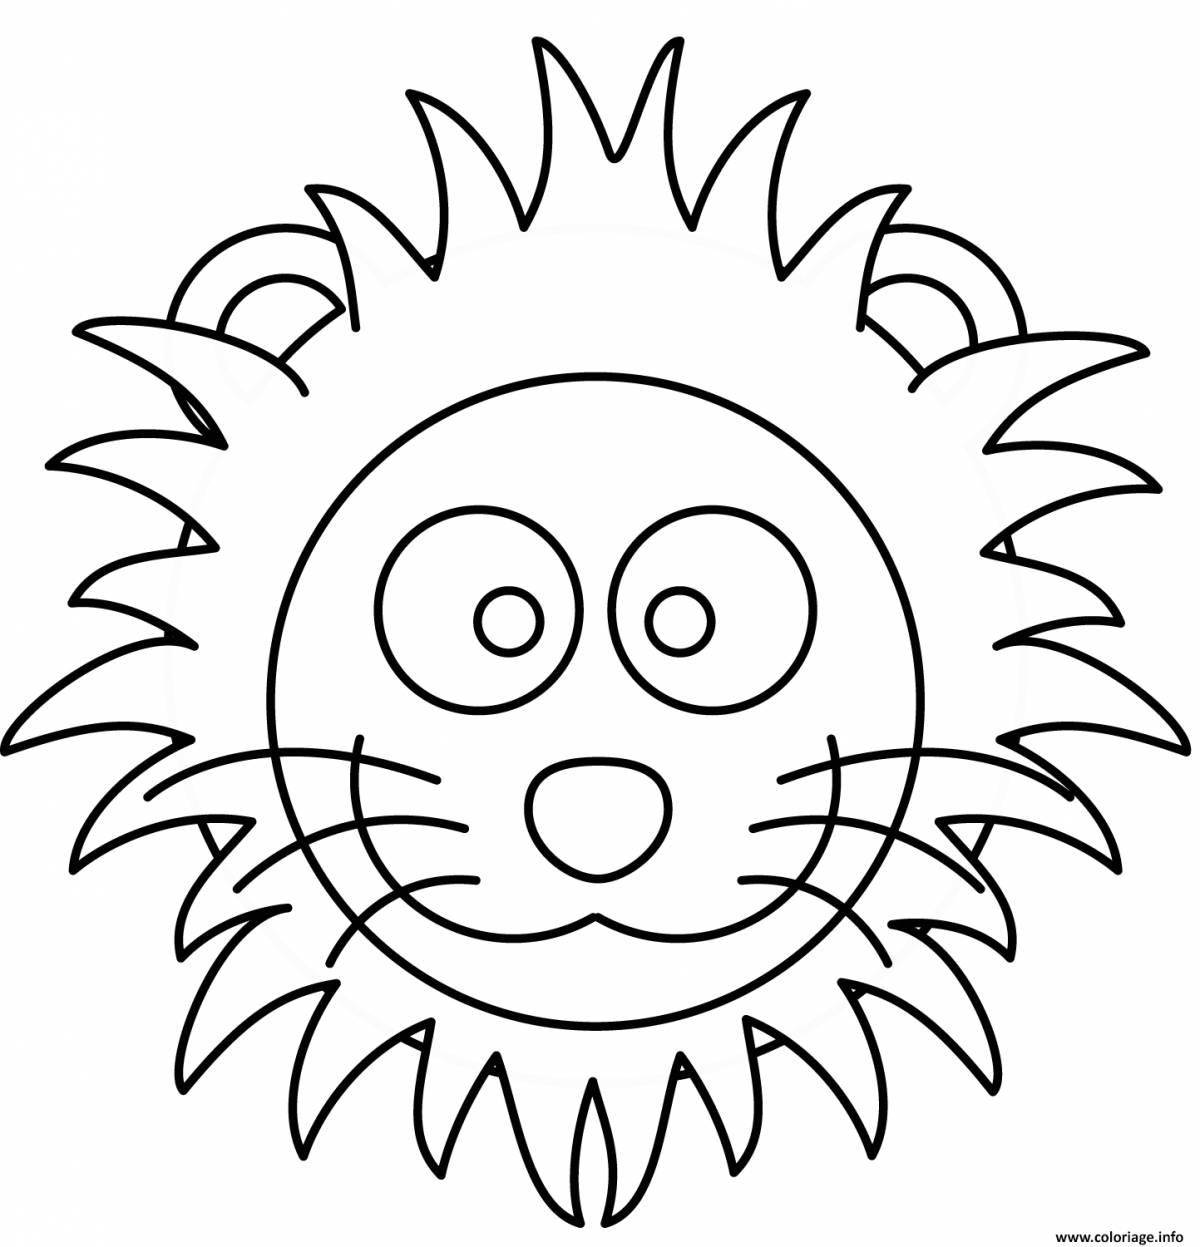 Coloring page energetic lion cub